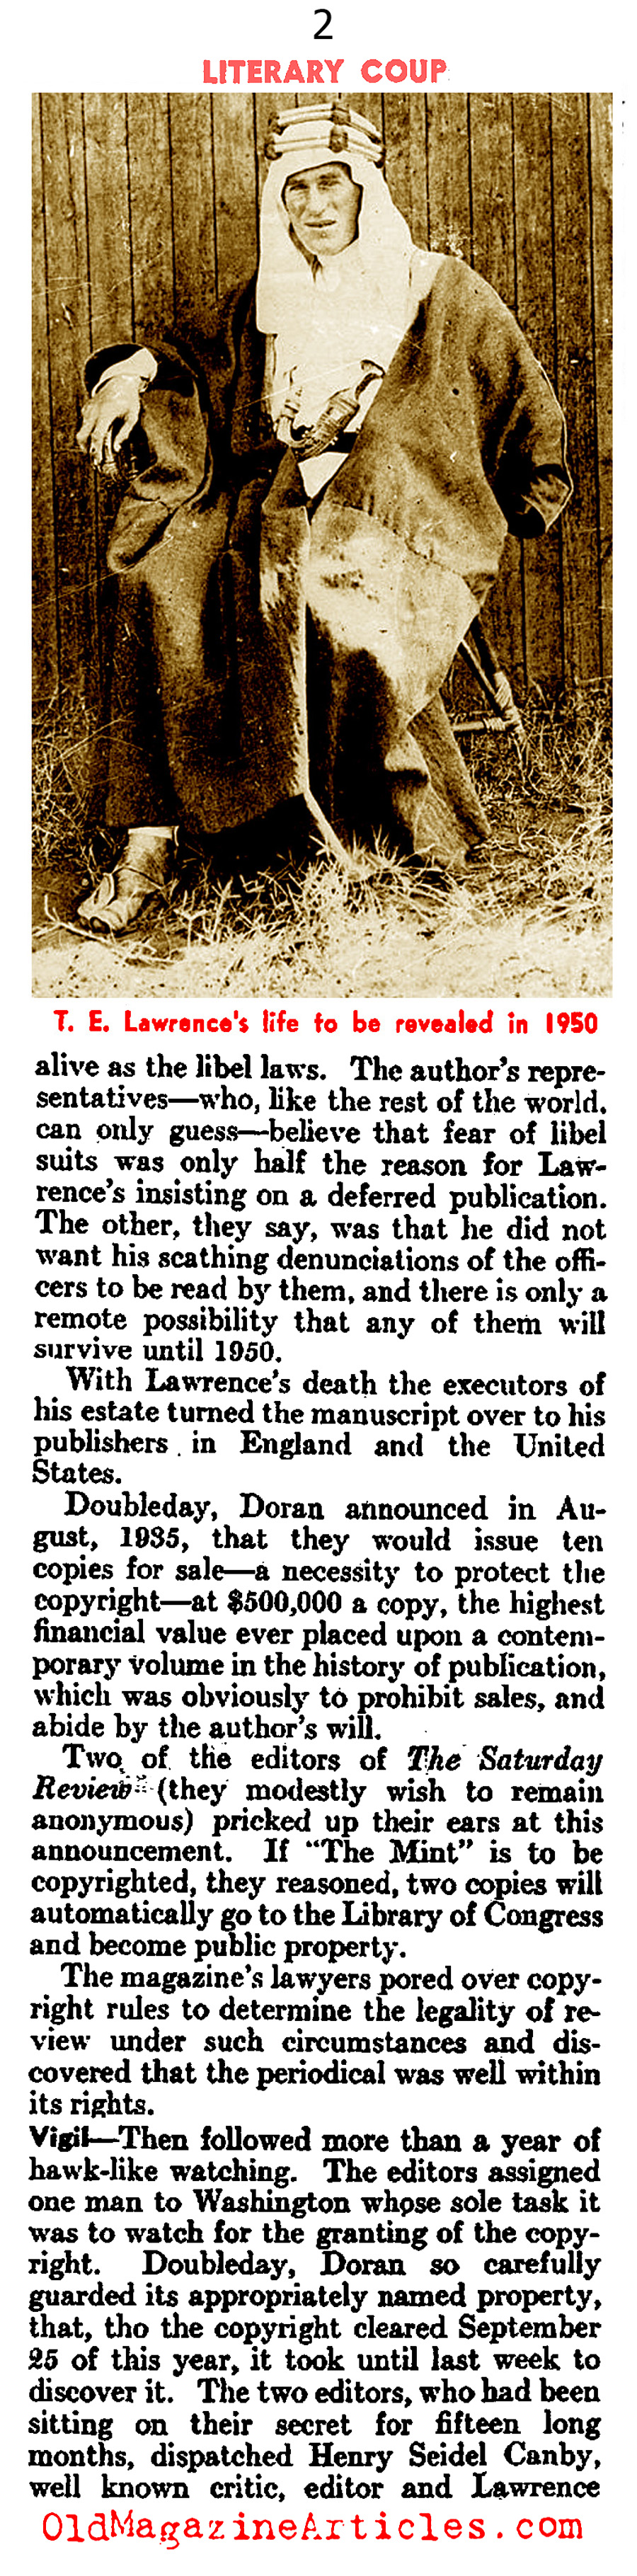 T.E. Lawrence and the Literary Coup of 1935 (Literary Digest, 1935)